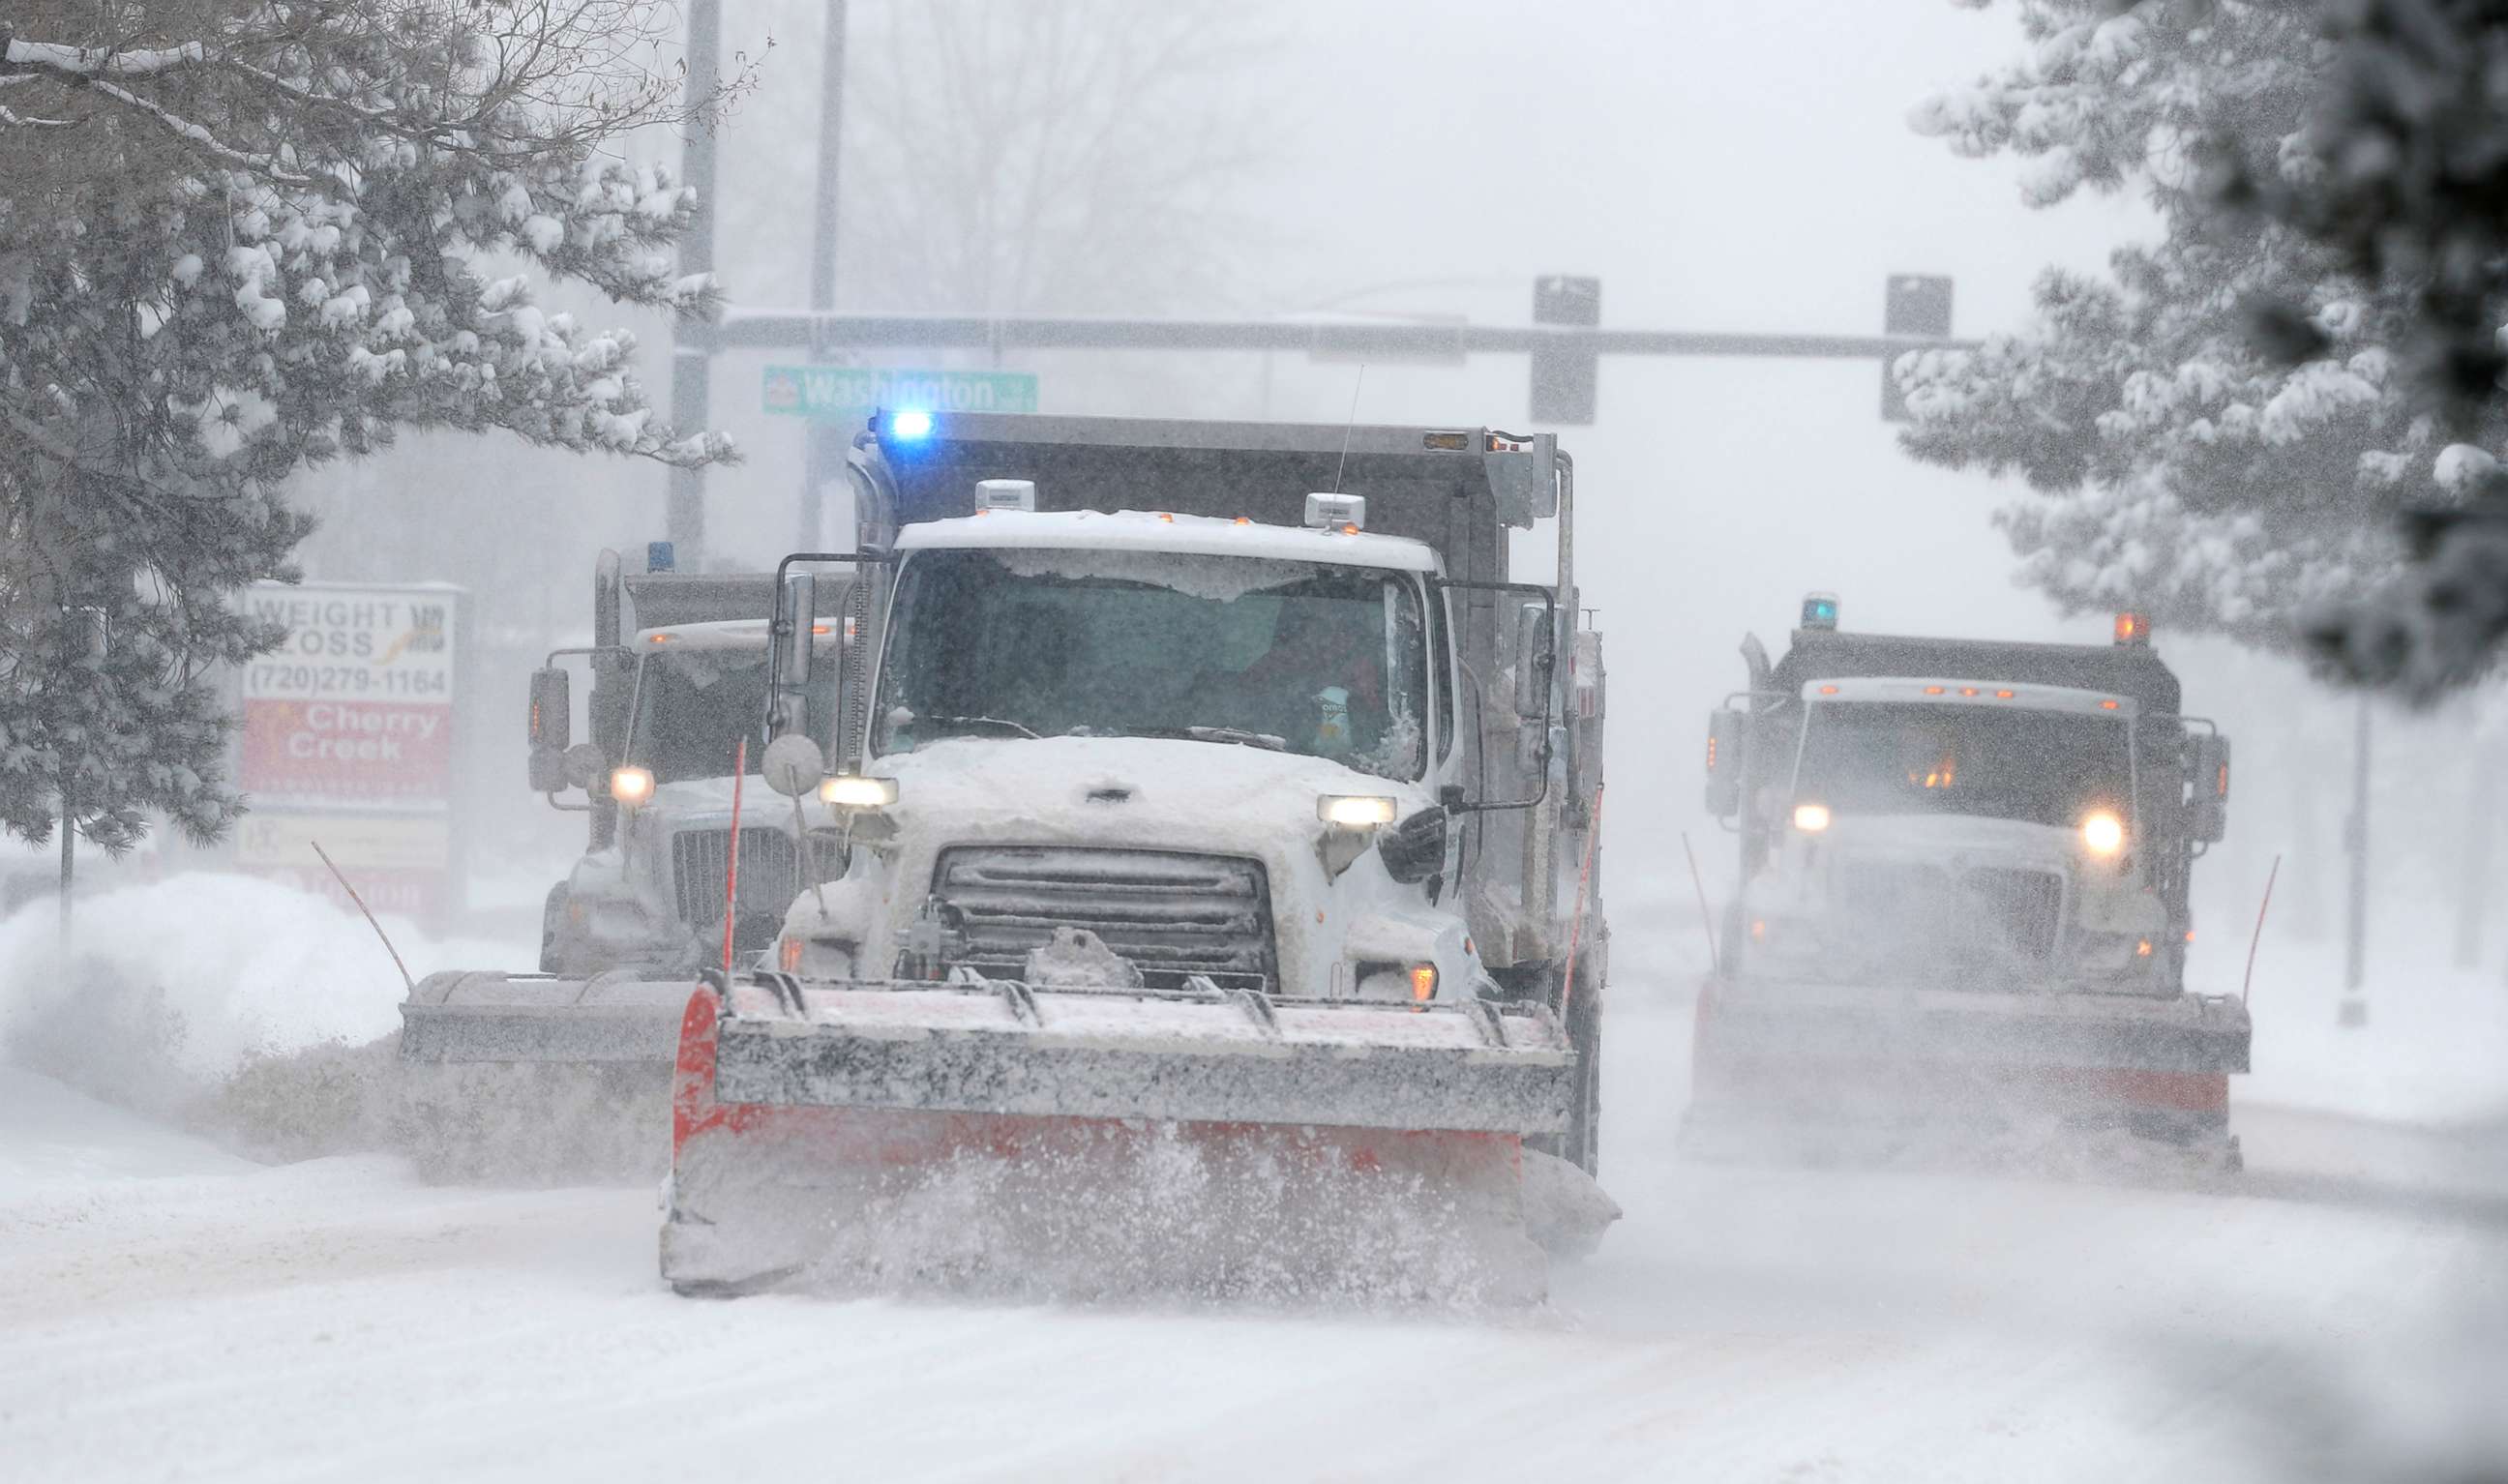 PHOTO: City of Denver snowplows clear the eastbound lanes of Speer Blvd. as a storm packing snow and high winds sweeps in over the region, Nov. 26, 2019, in Denver.